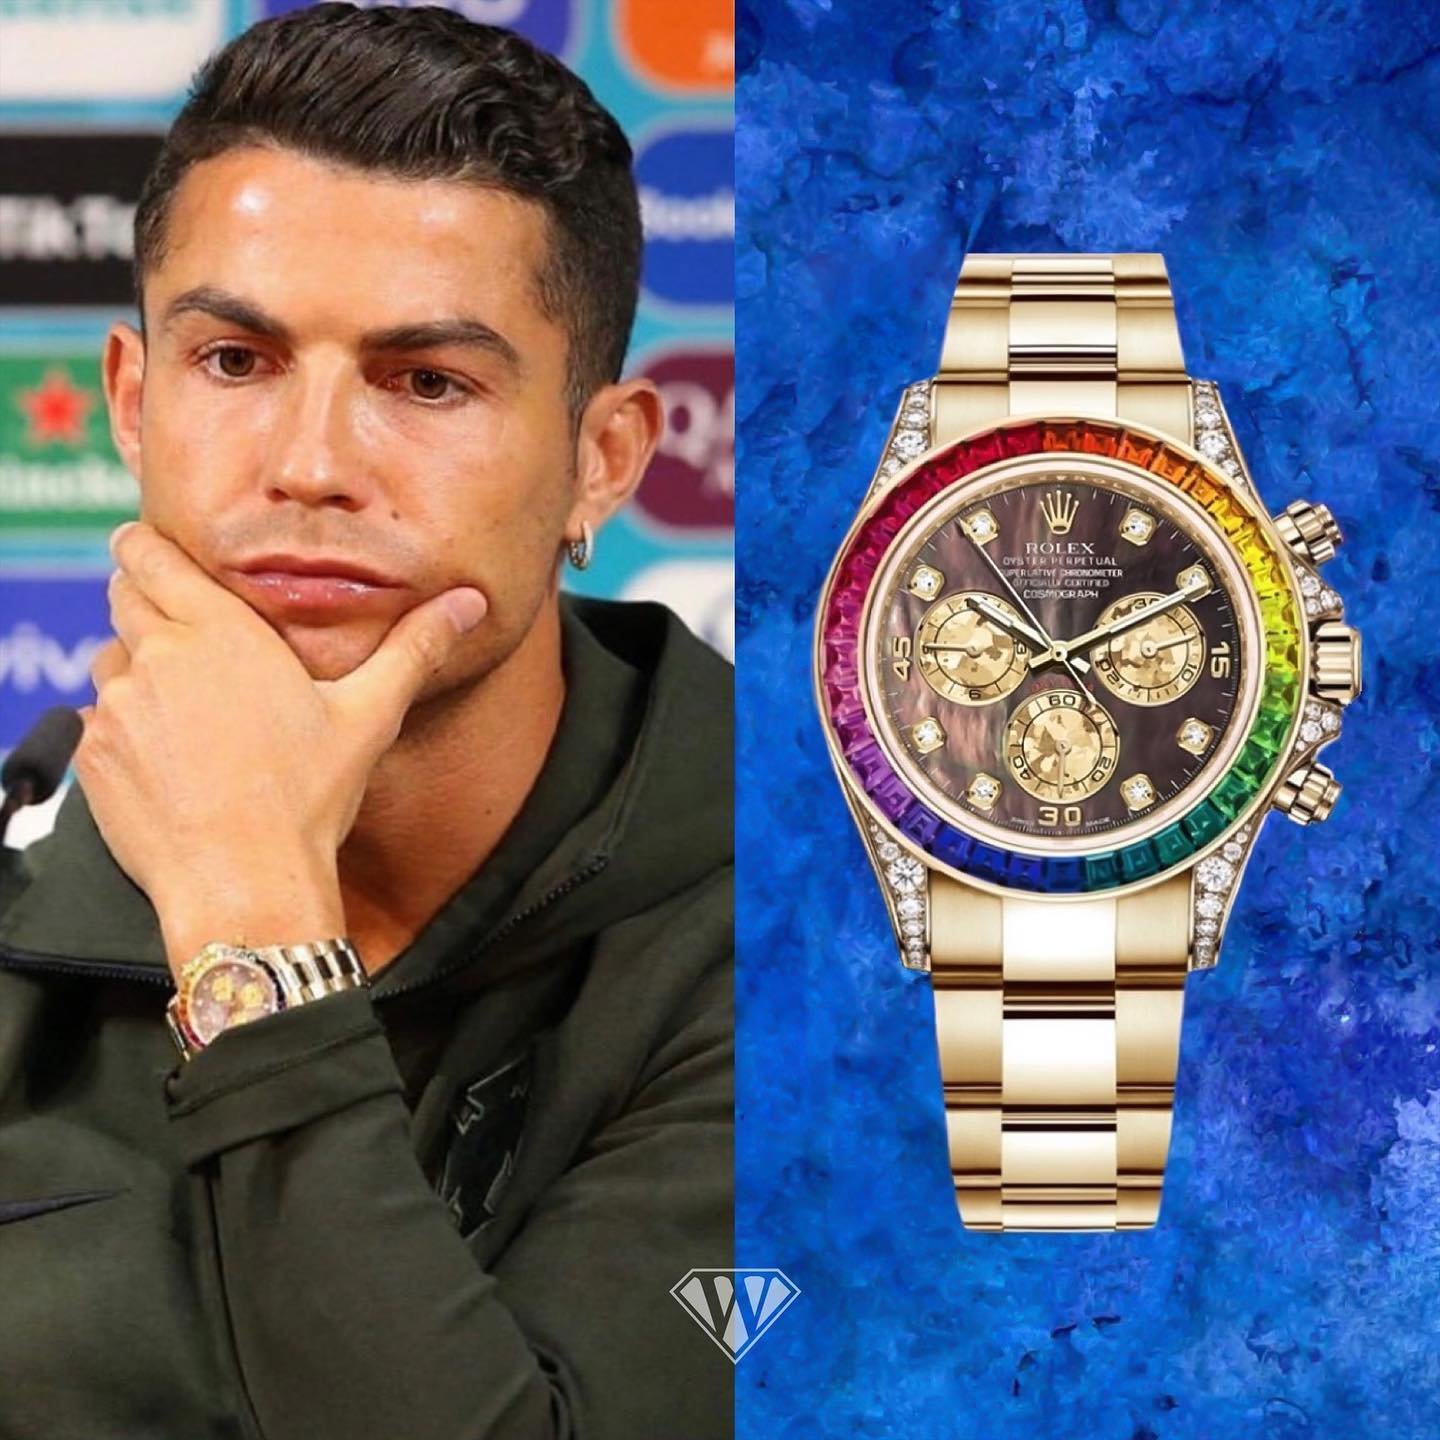 Check Out Cristiano ‘GOAT’ Ronaldo’s Crazy Expensive Watch Collection